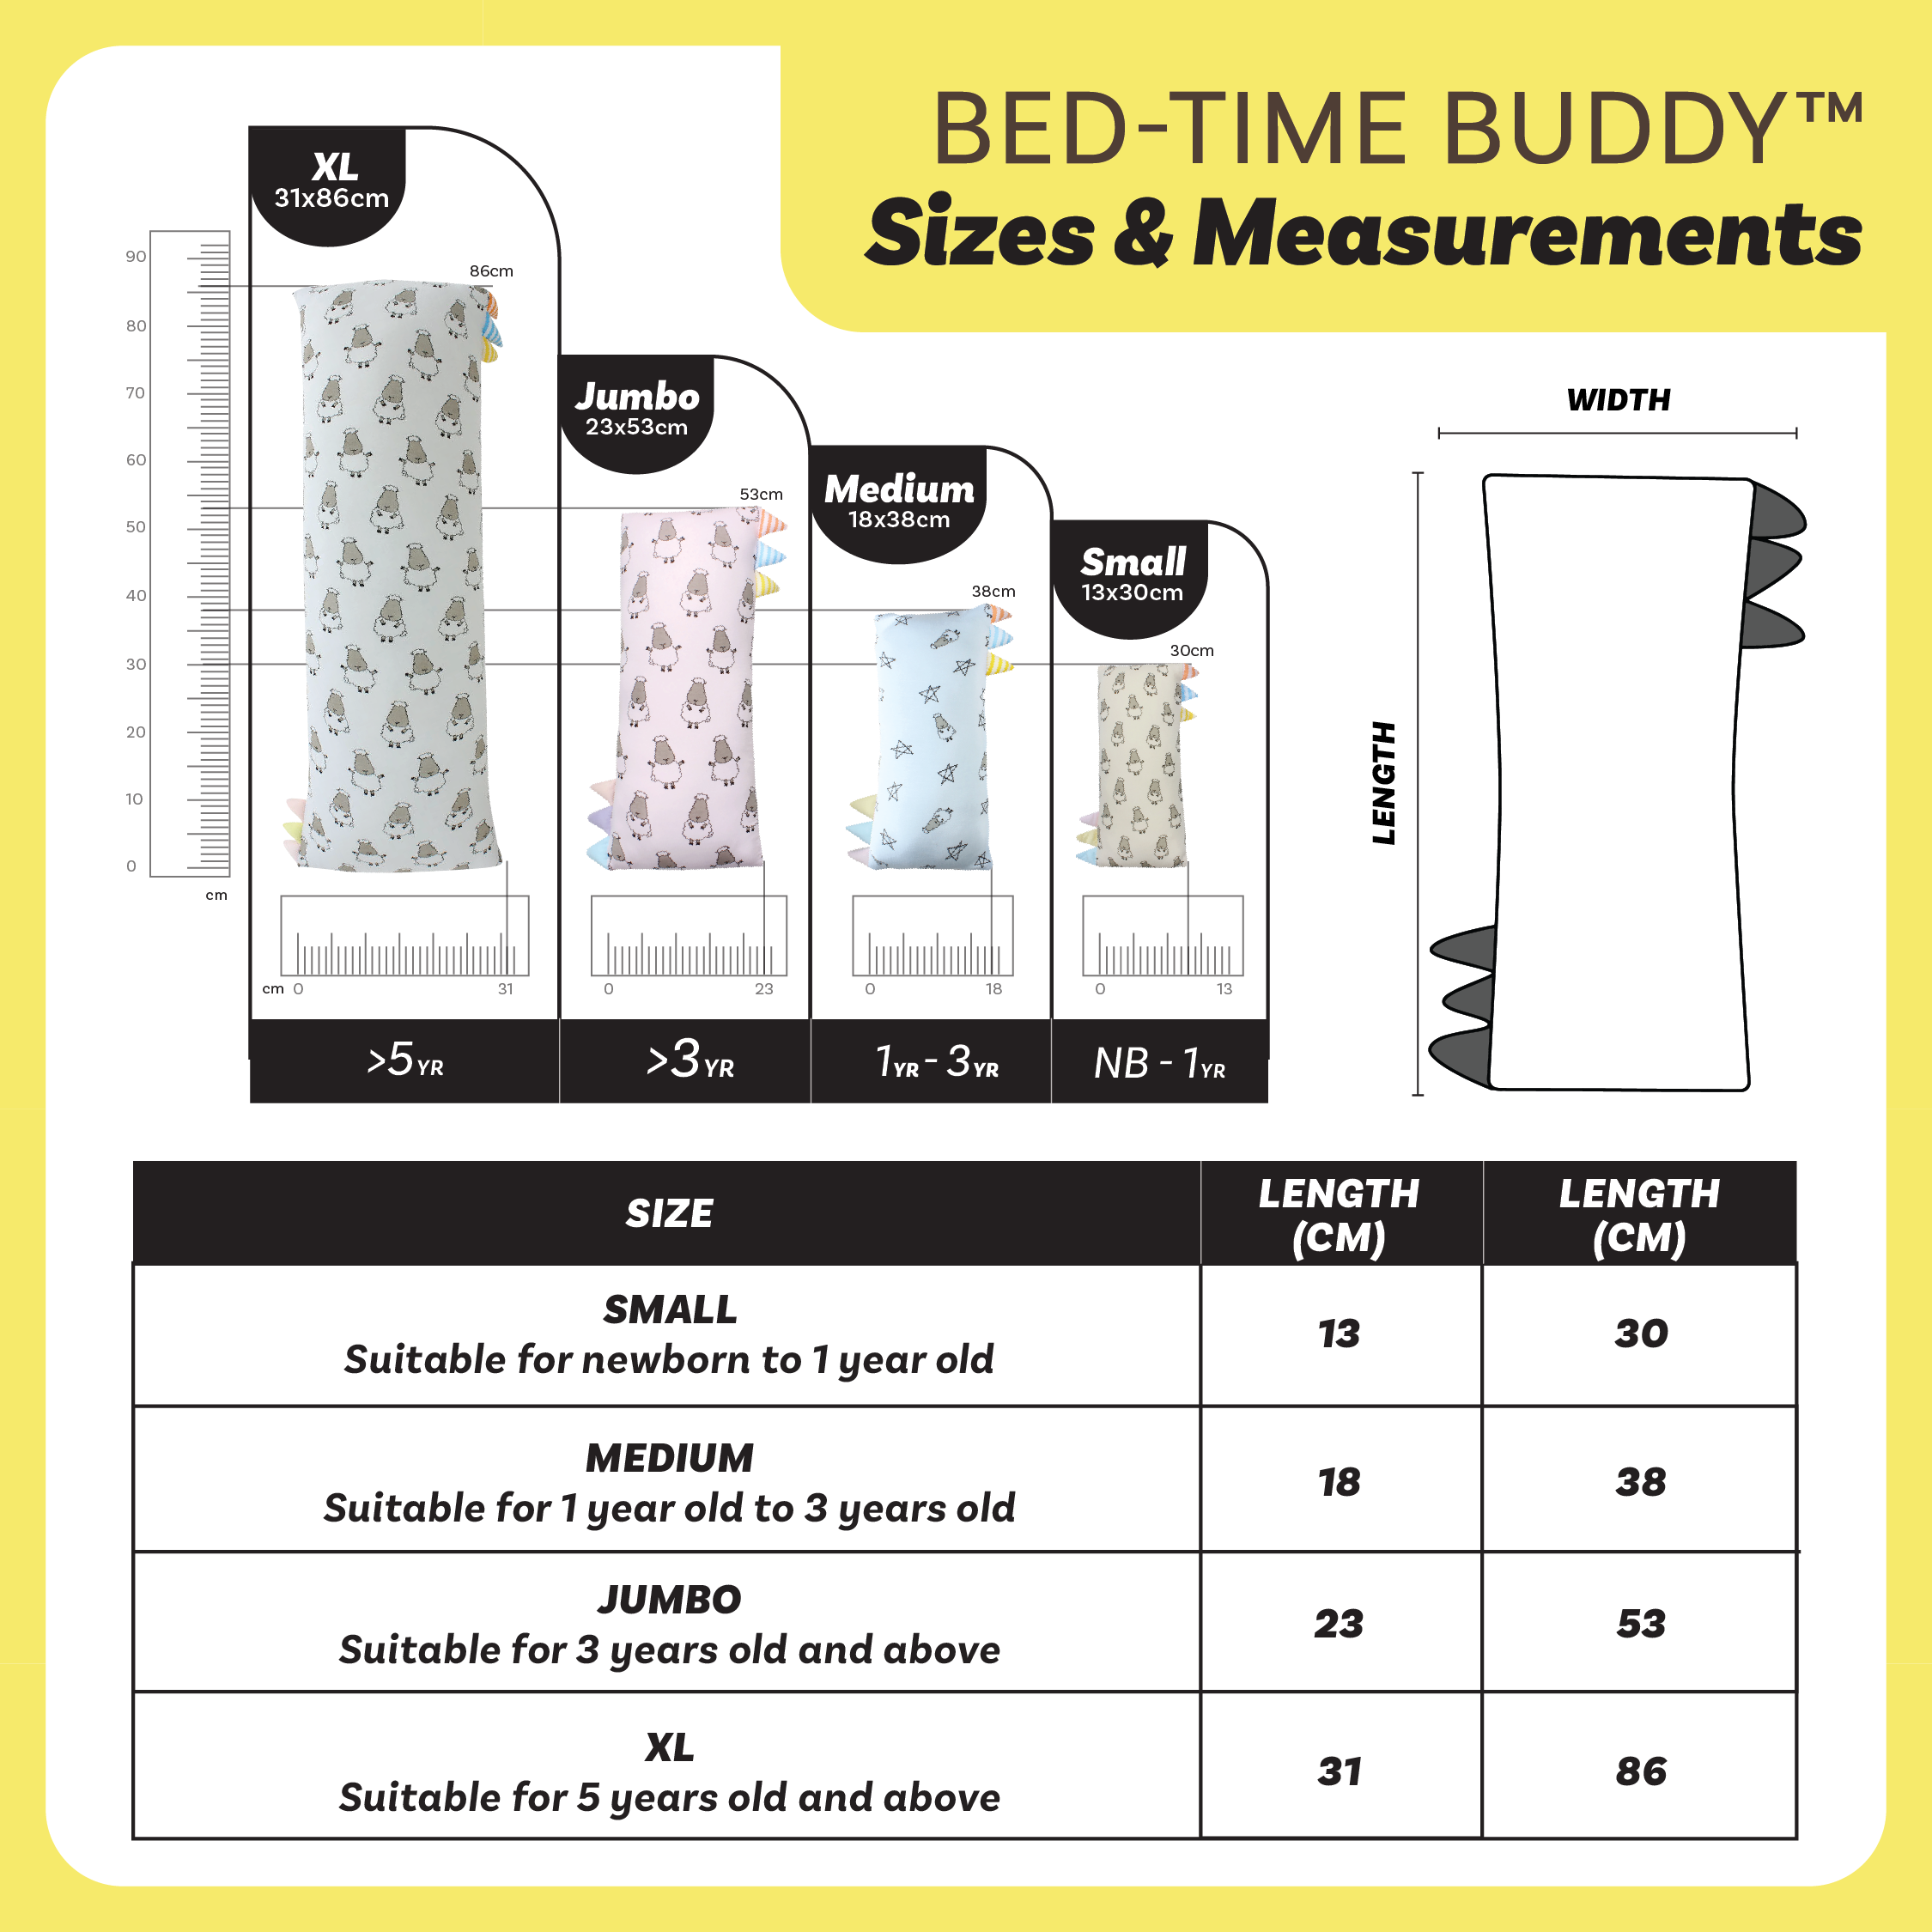 Bed-Time Buddy™ Small Star & Sheepz Pink with Color & Stripe tag - Medium (size 18x38cm)